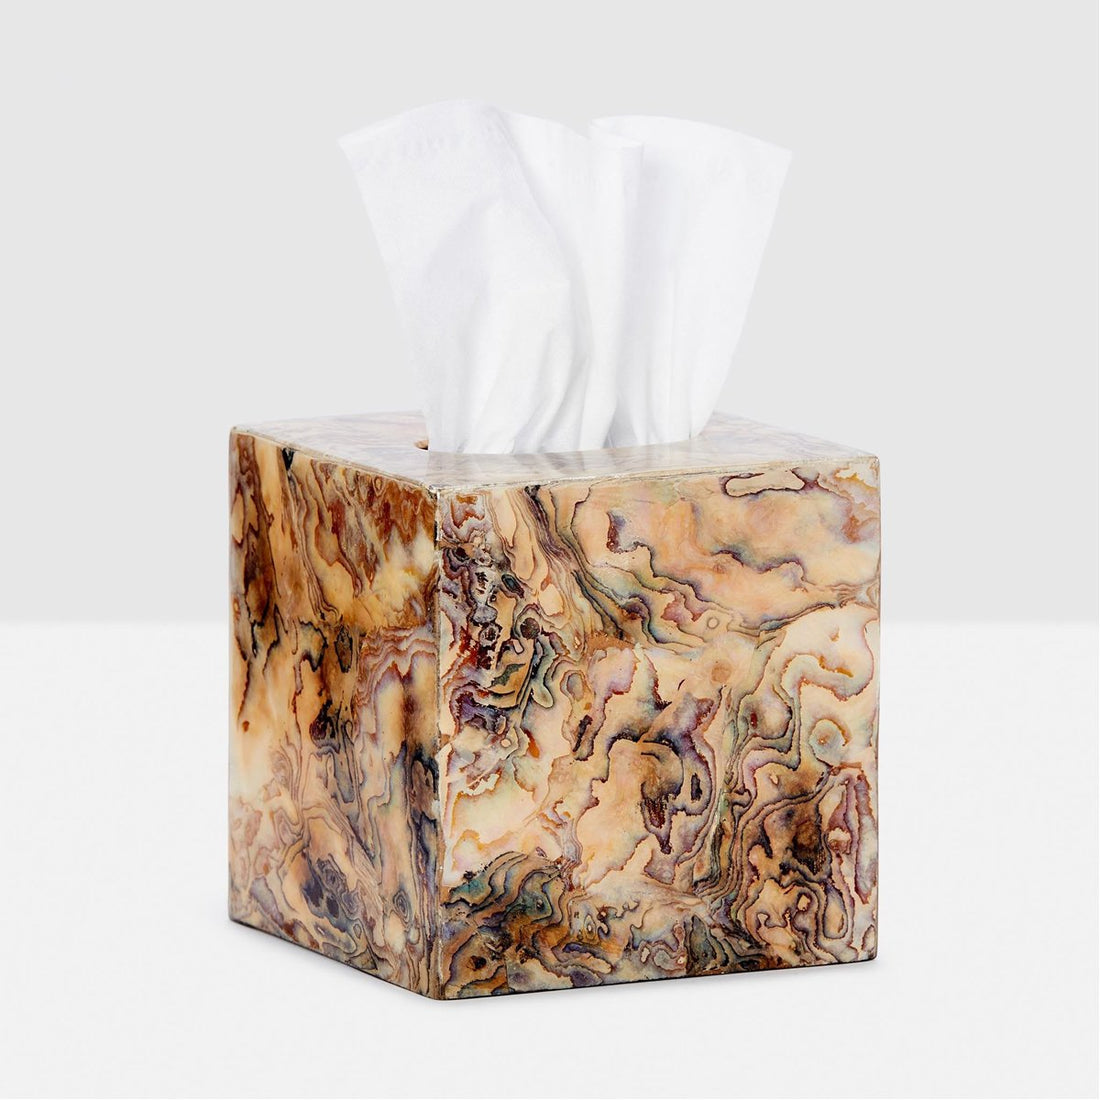 Pigeon and Poodle Adana Tissue Box, Square